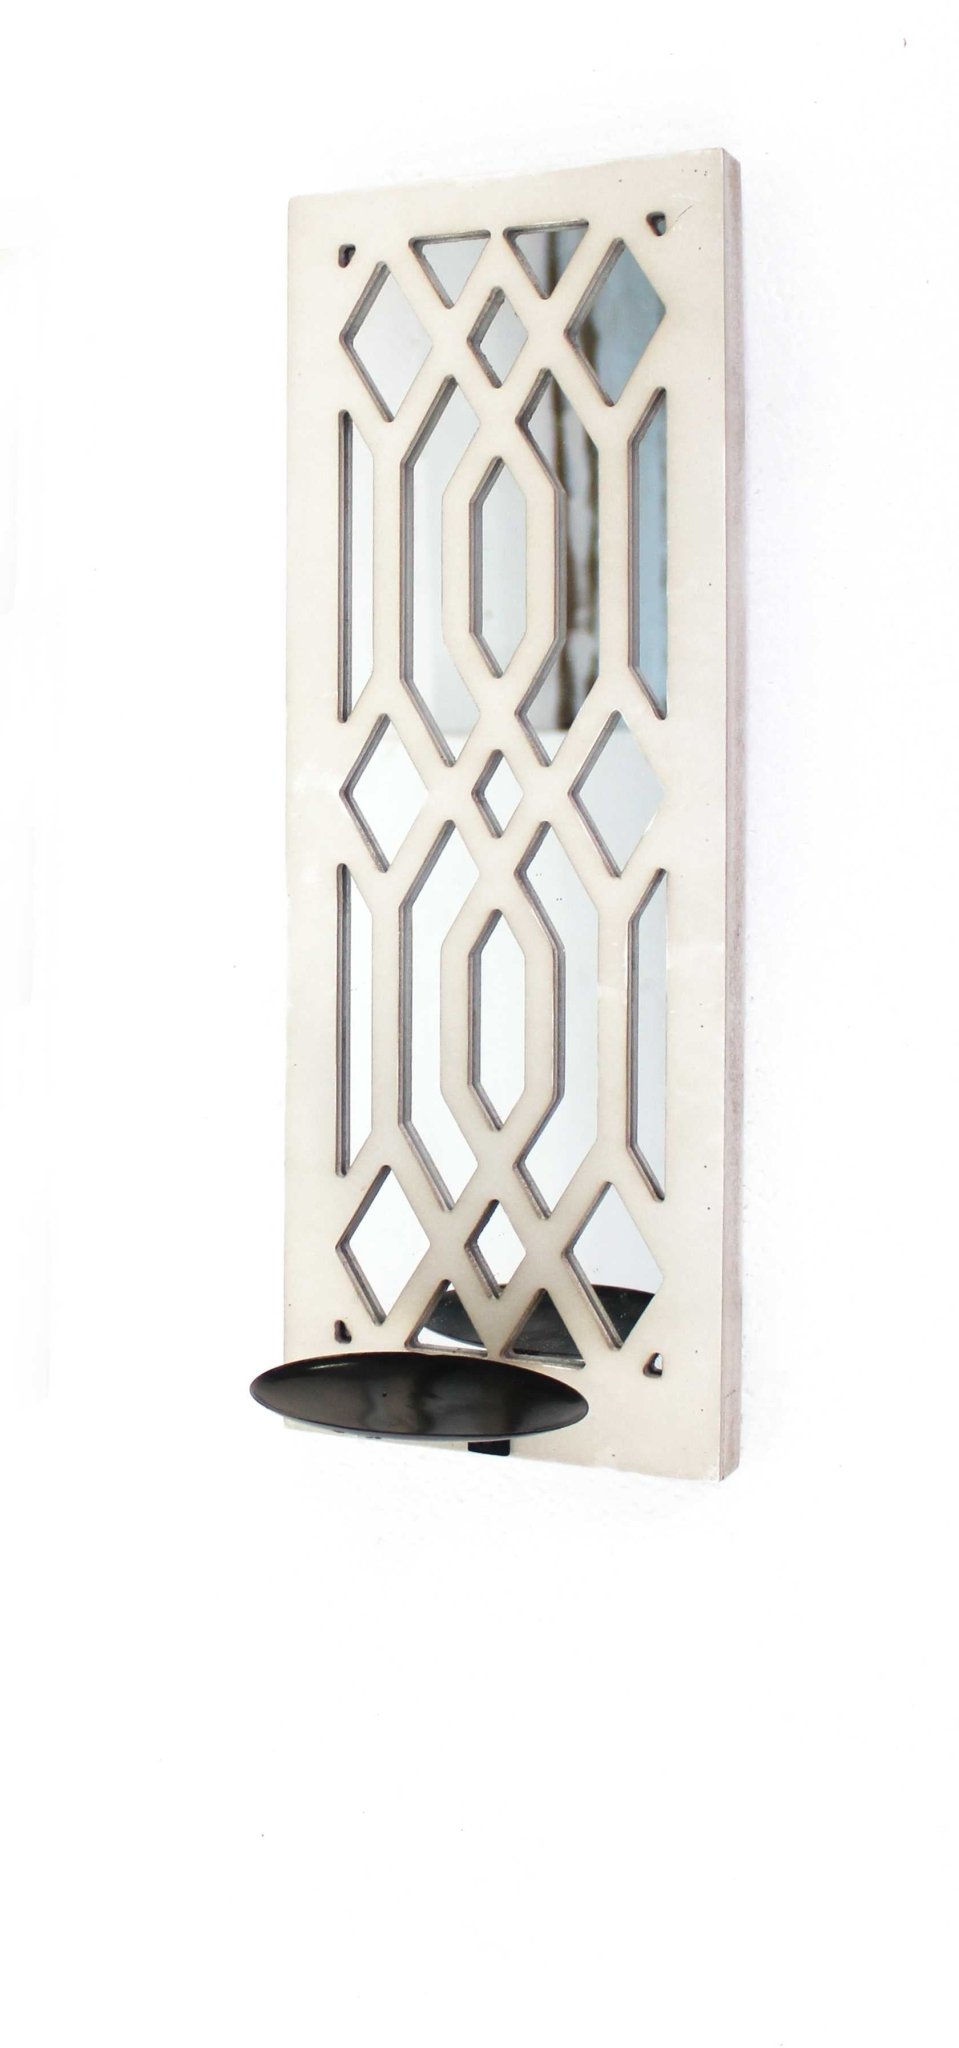 17.25 X 5.25 X 6.25 White Wooden Cross - Candle Holder Sconce - Tuesday Morning-Candle Holders